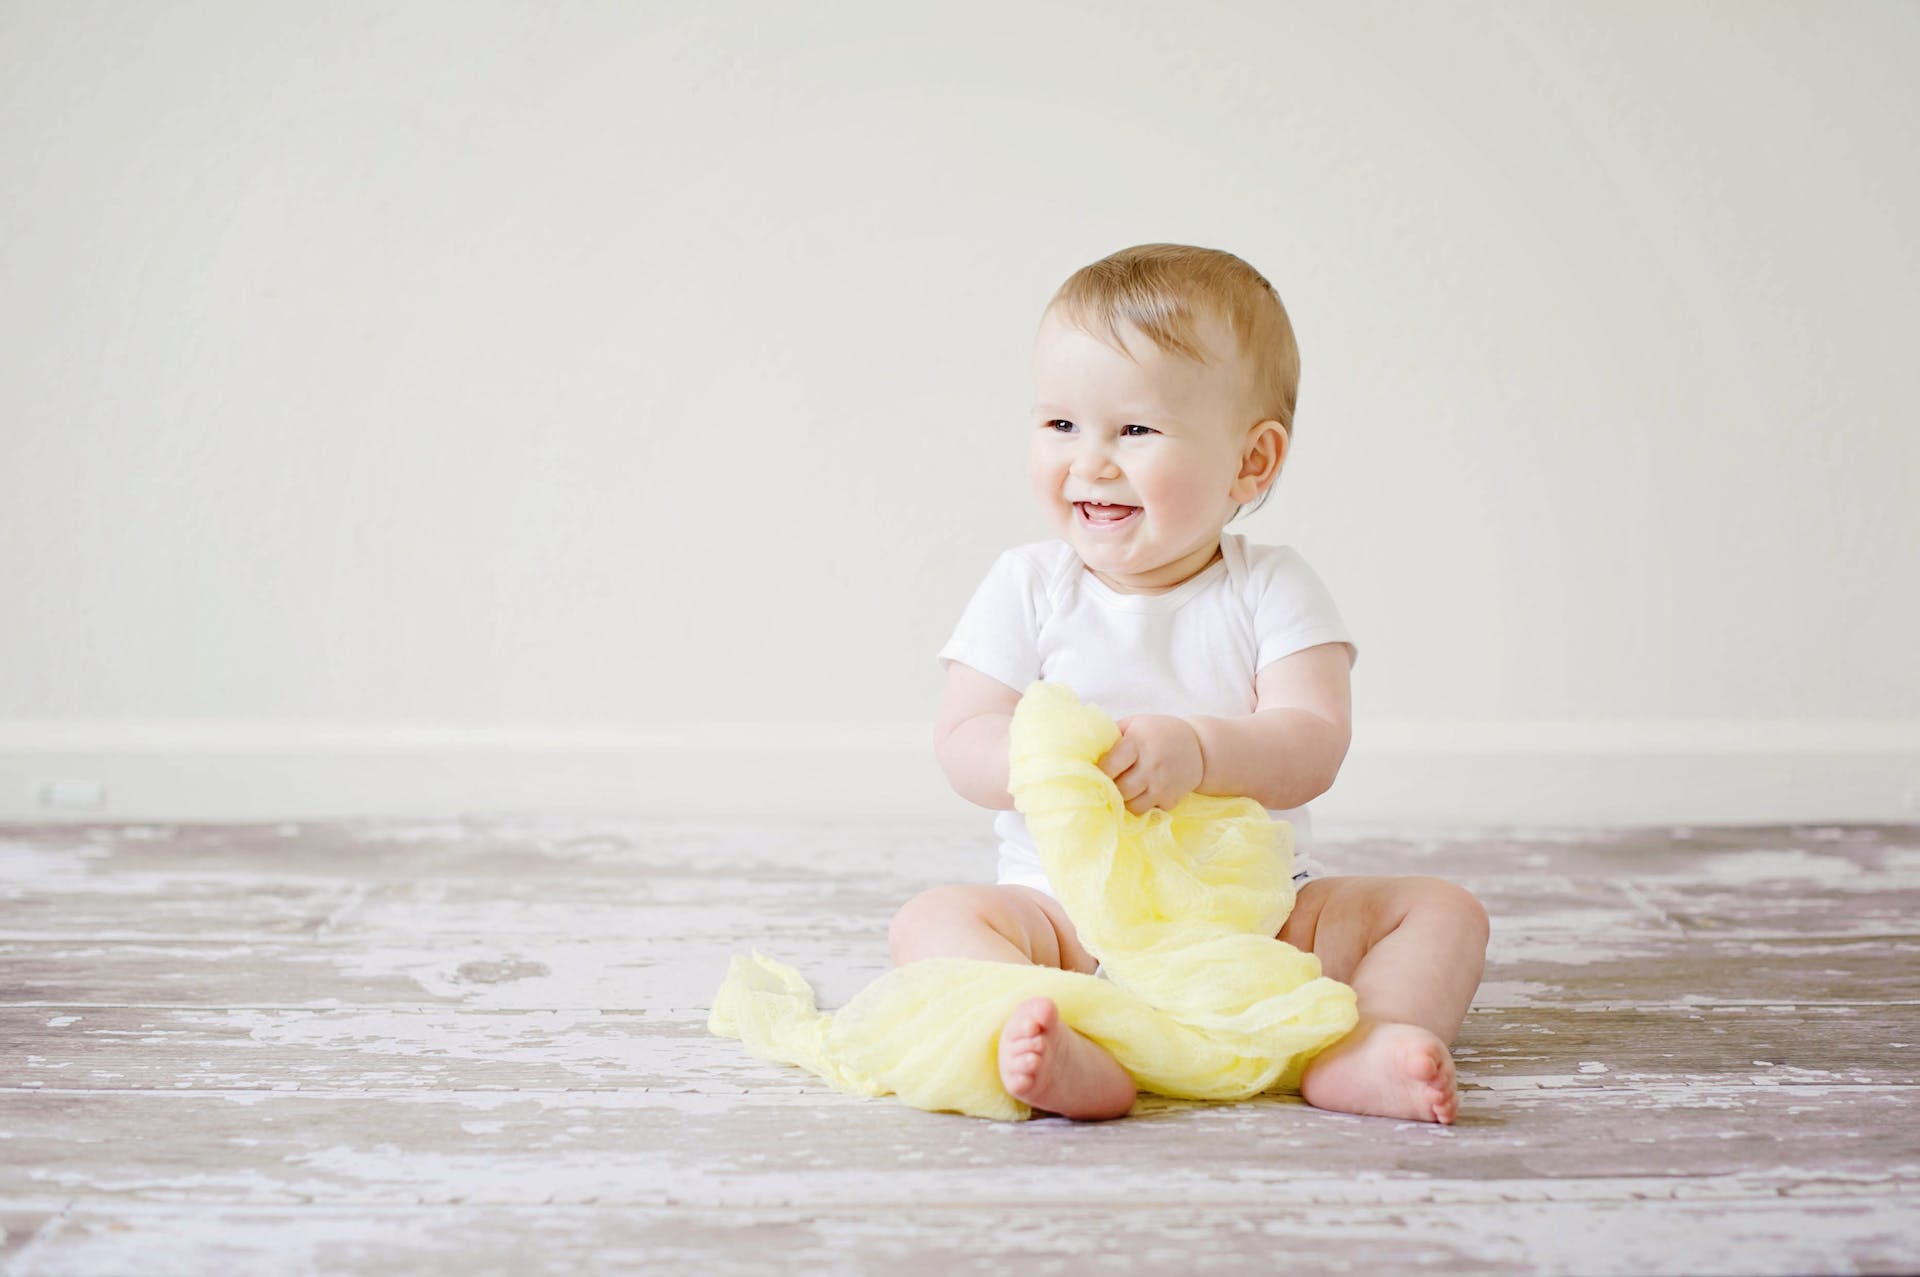 A baby laughing while sitting on the floor | Source: Pexels